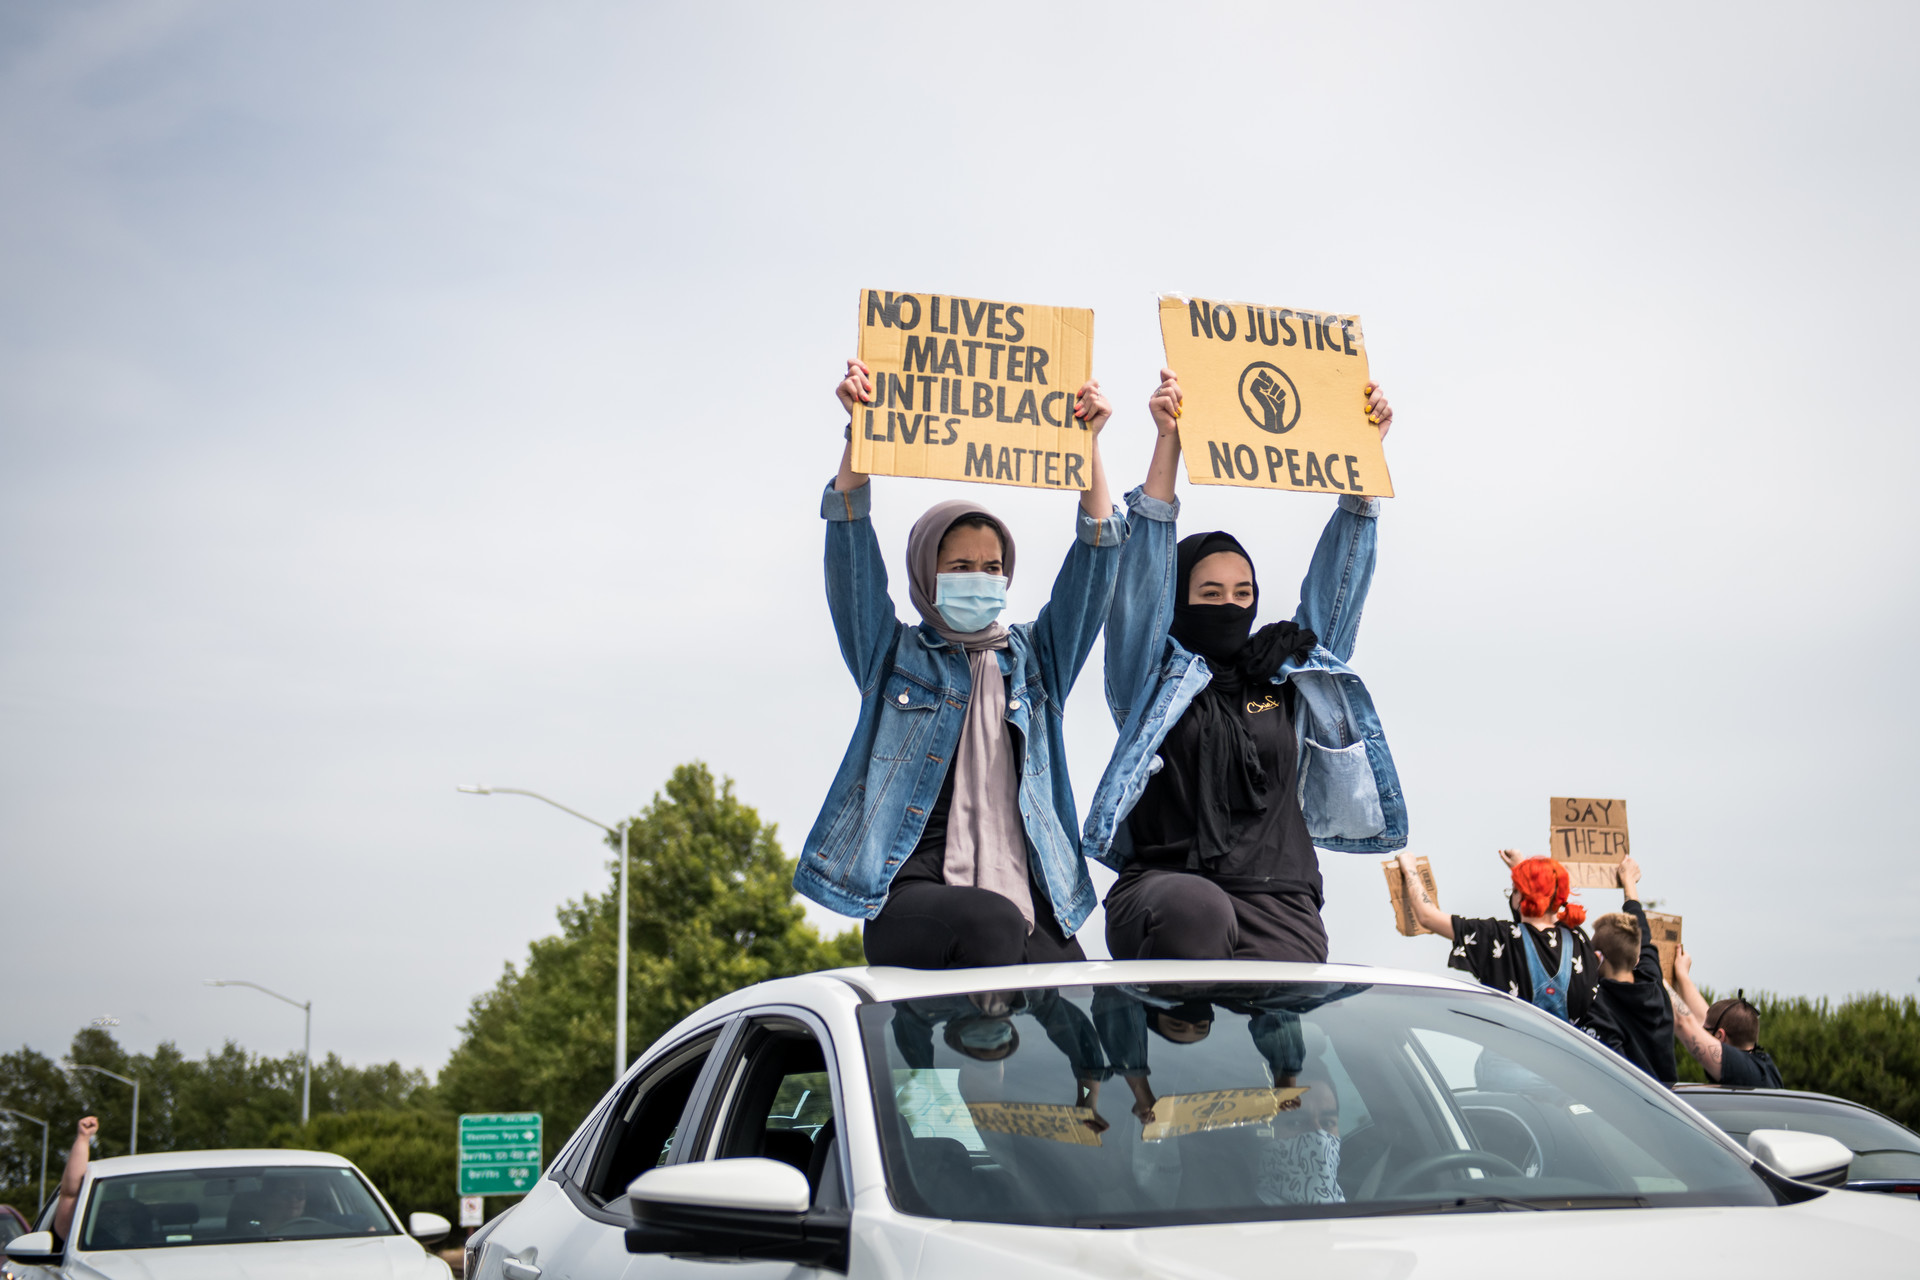 Thousands of vehicles lined up at the Port of Oakland before departing to Lake Merritt on Sunday May 31, 2020 to take part in a caravan protesting the killing of George Floyd and other Black people at the hands of the police.